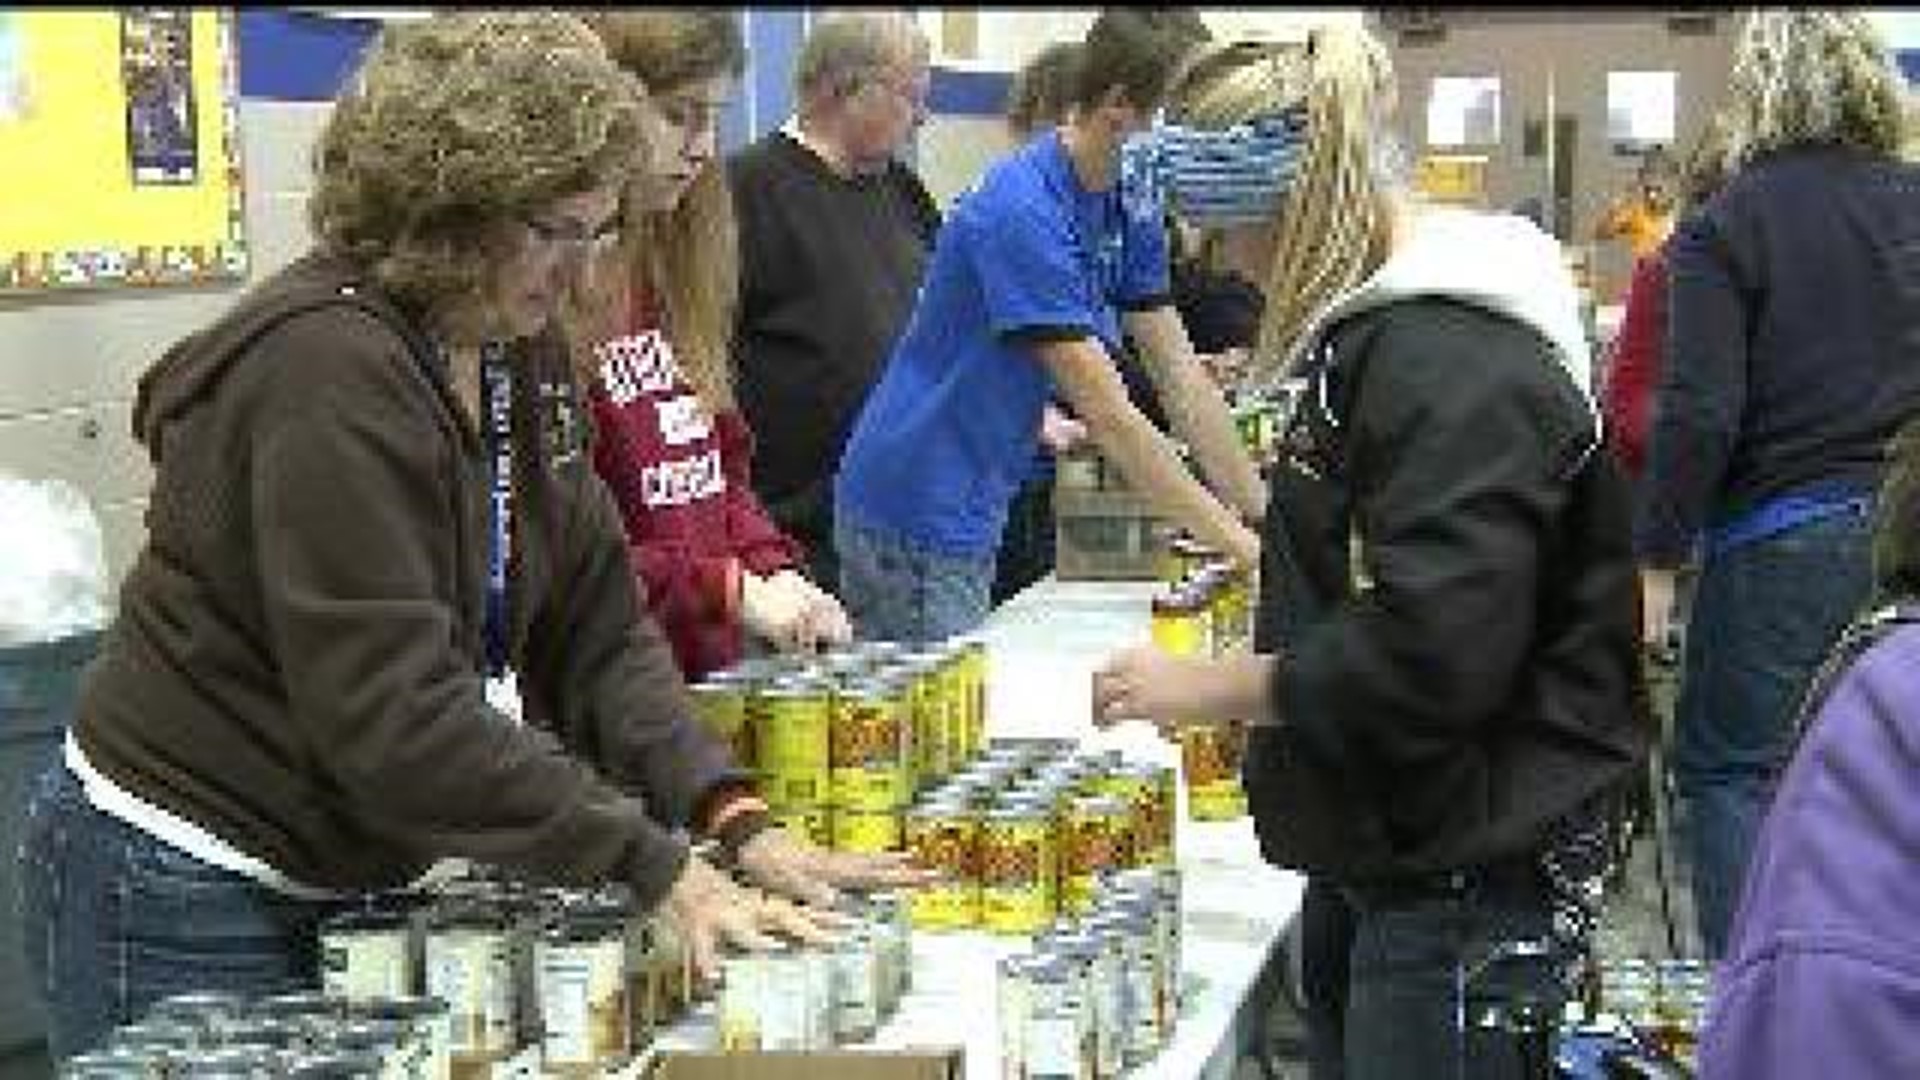 Student Hunger Drive Hosts Mobile Food Pantry